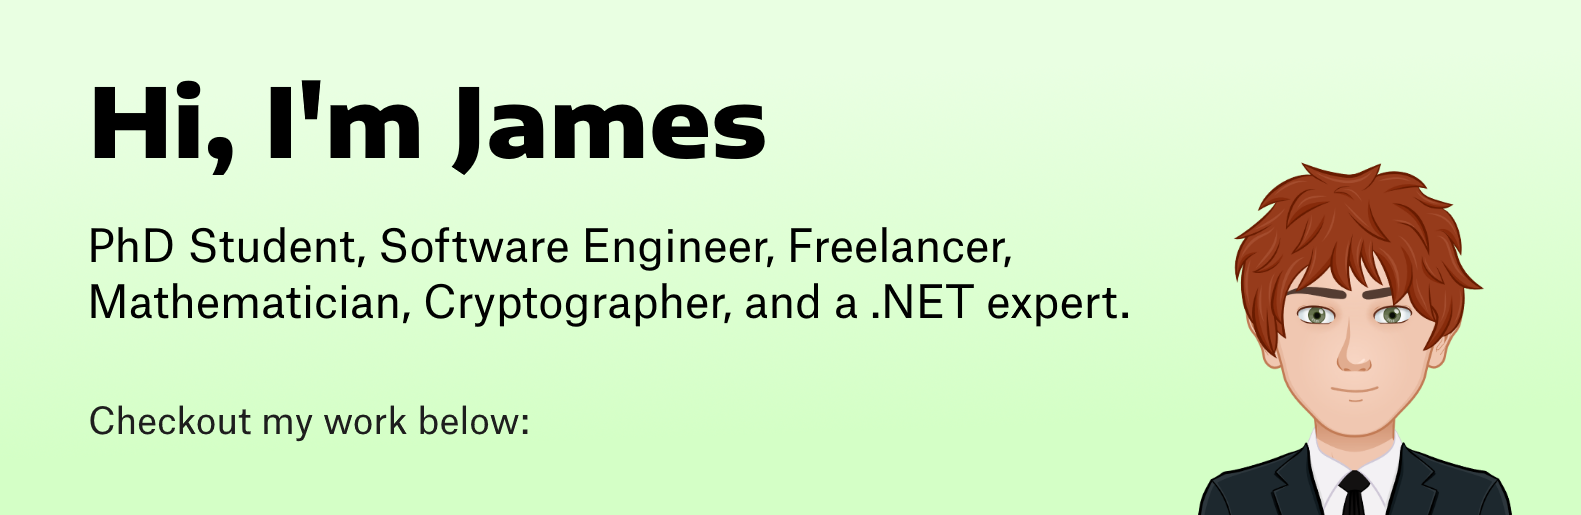 Hi, I'm James. PhD Student, Software Engineer, Freelancer, Mathematician, Cryptographer, and a .NET expert. Checkout my work below: